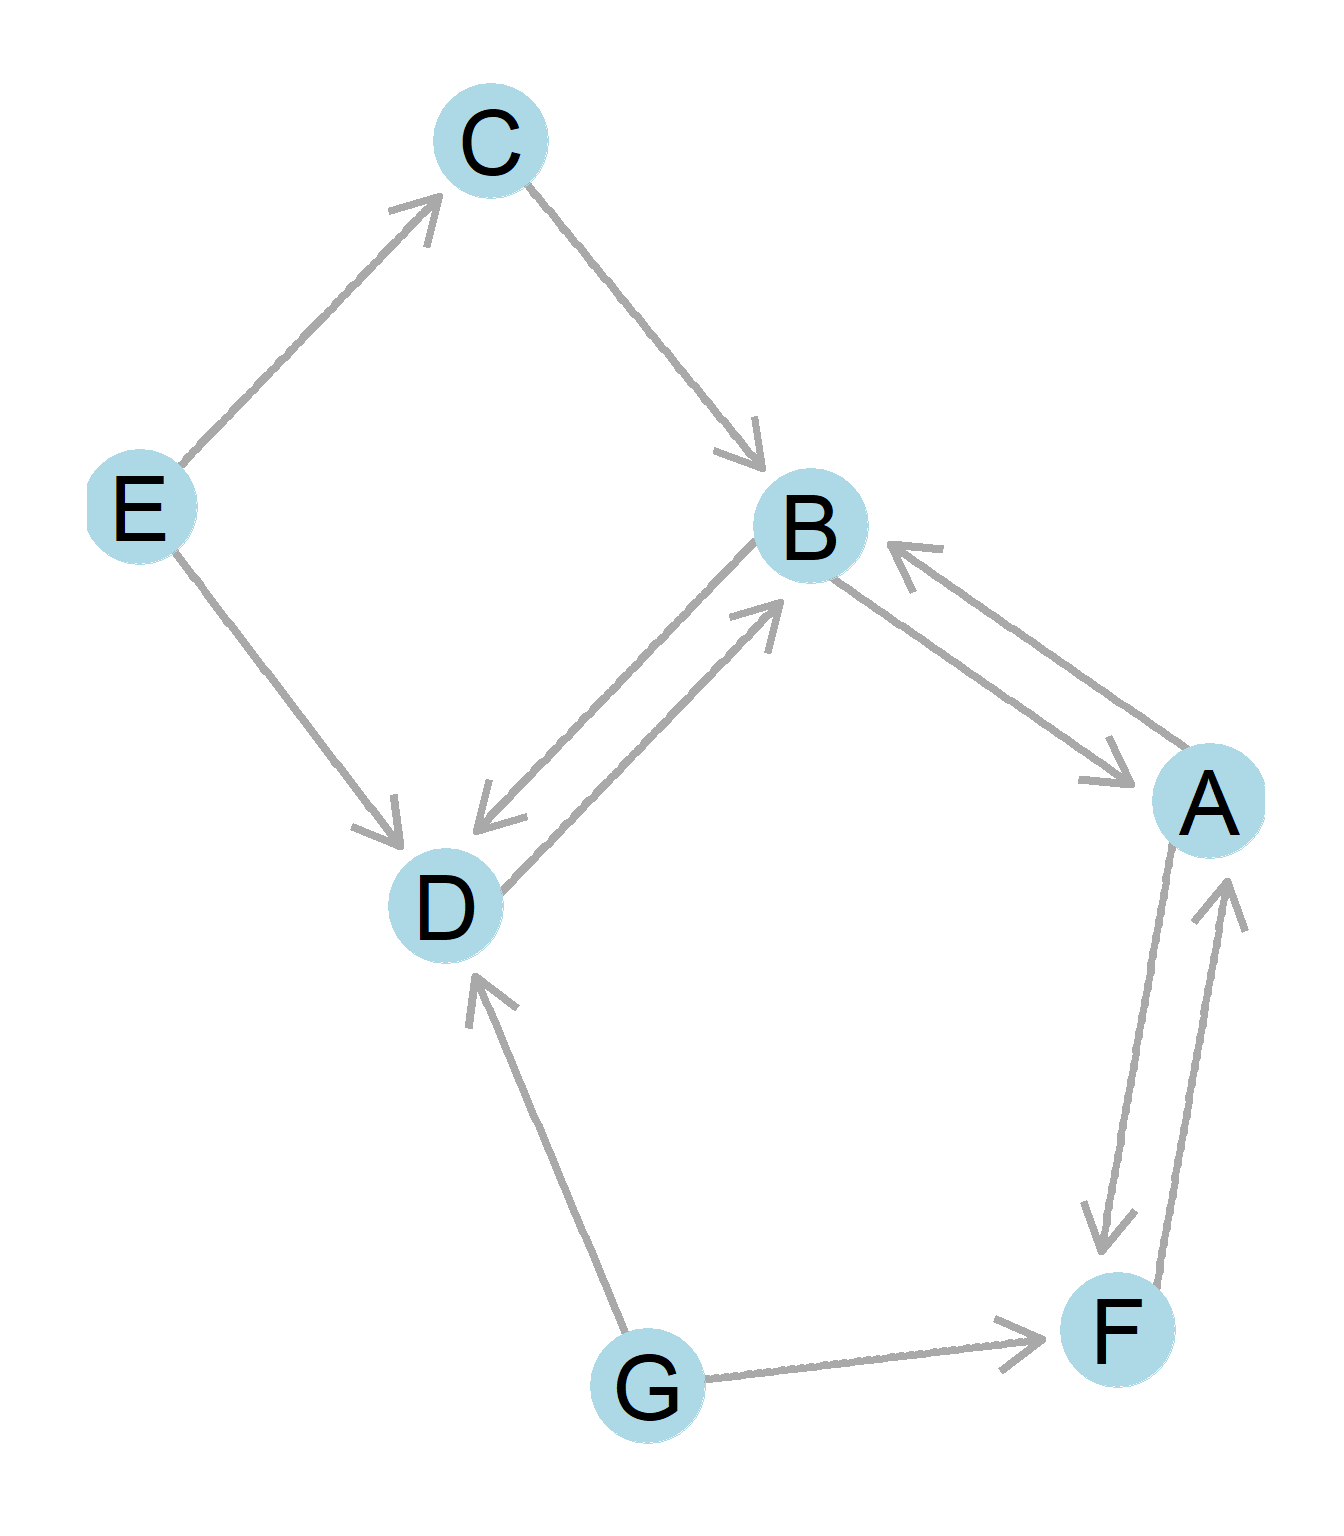 A directed graph.